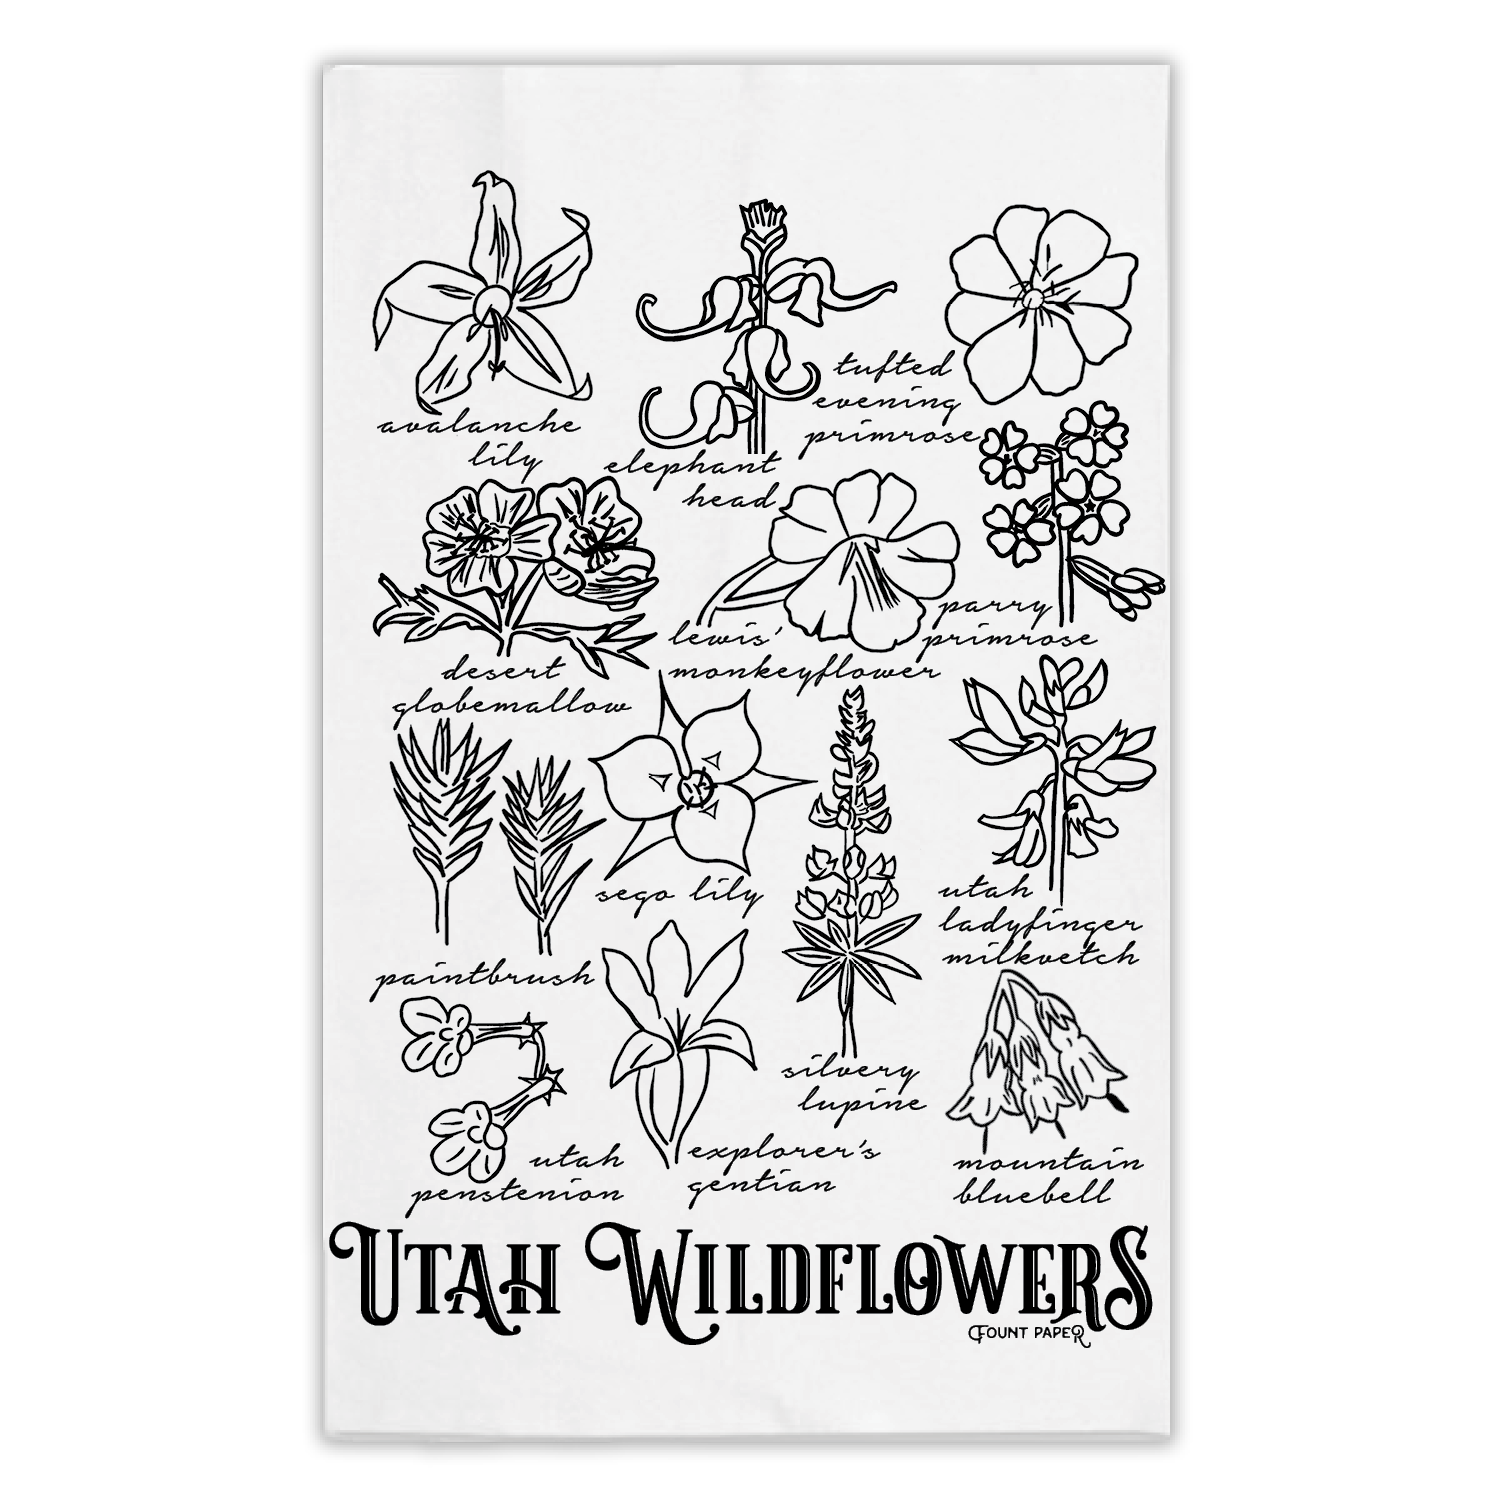 Hand drawn wildflowers from Utah printed with black ink on a white tea towel